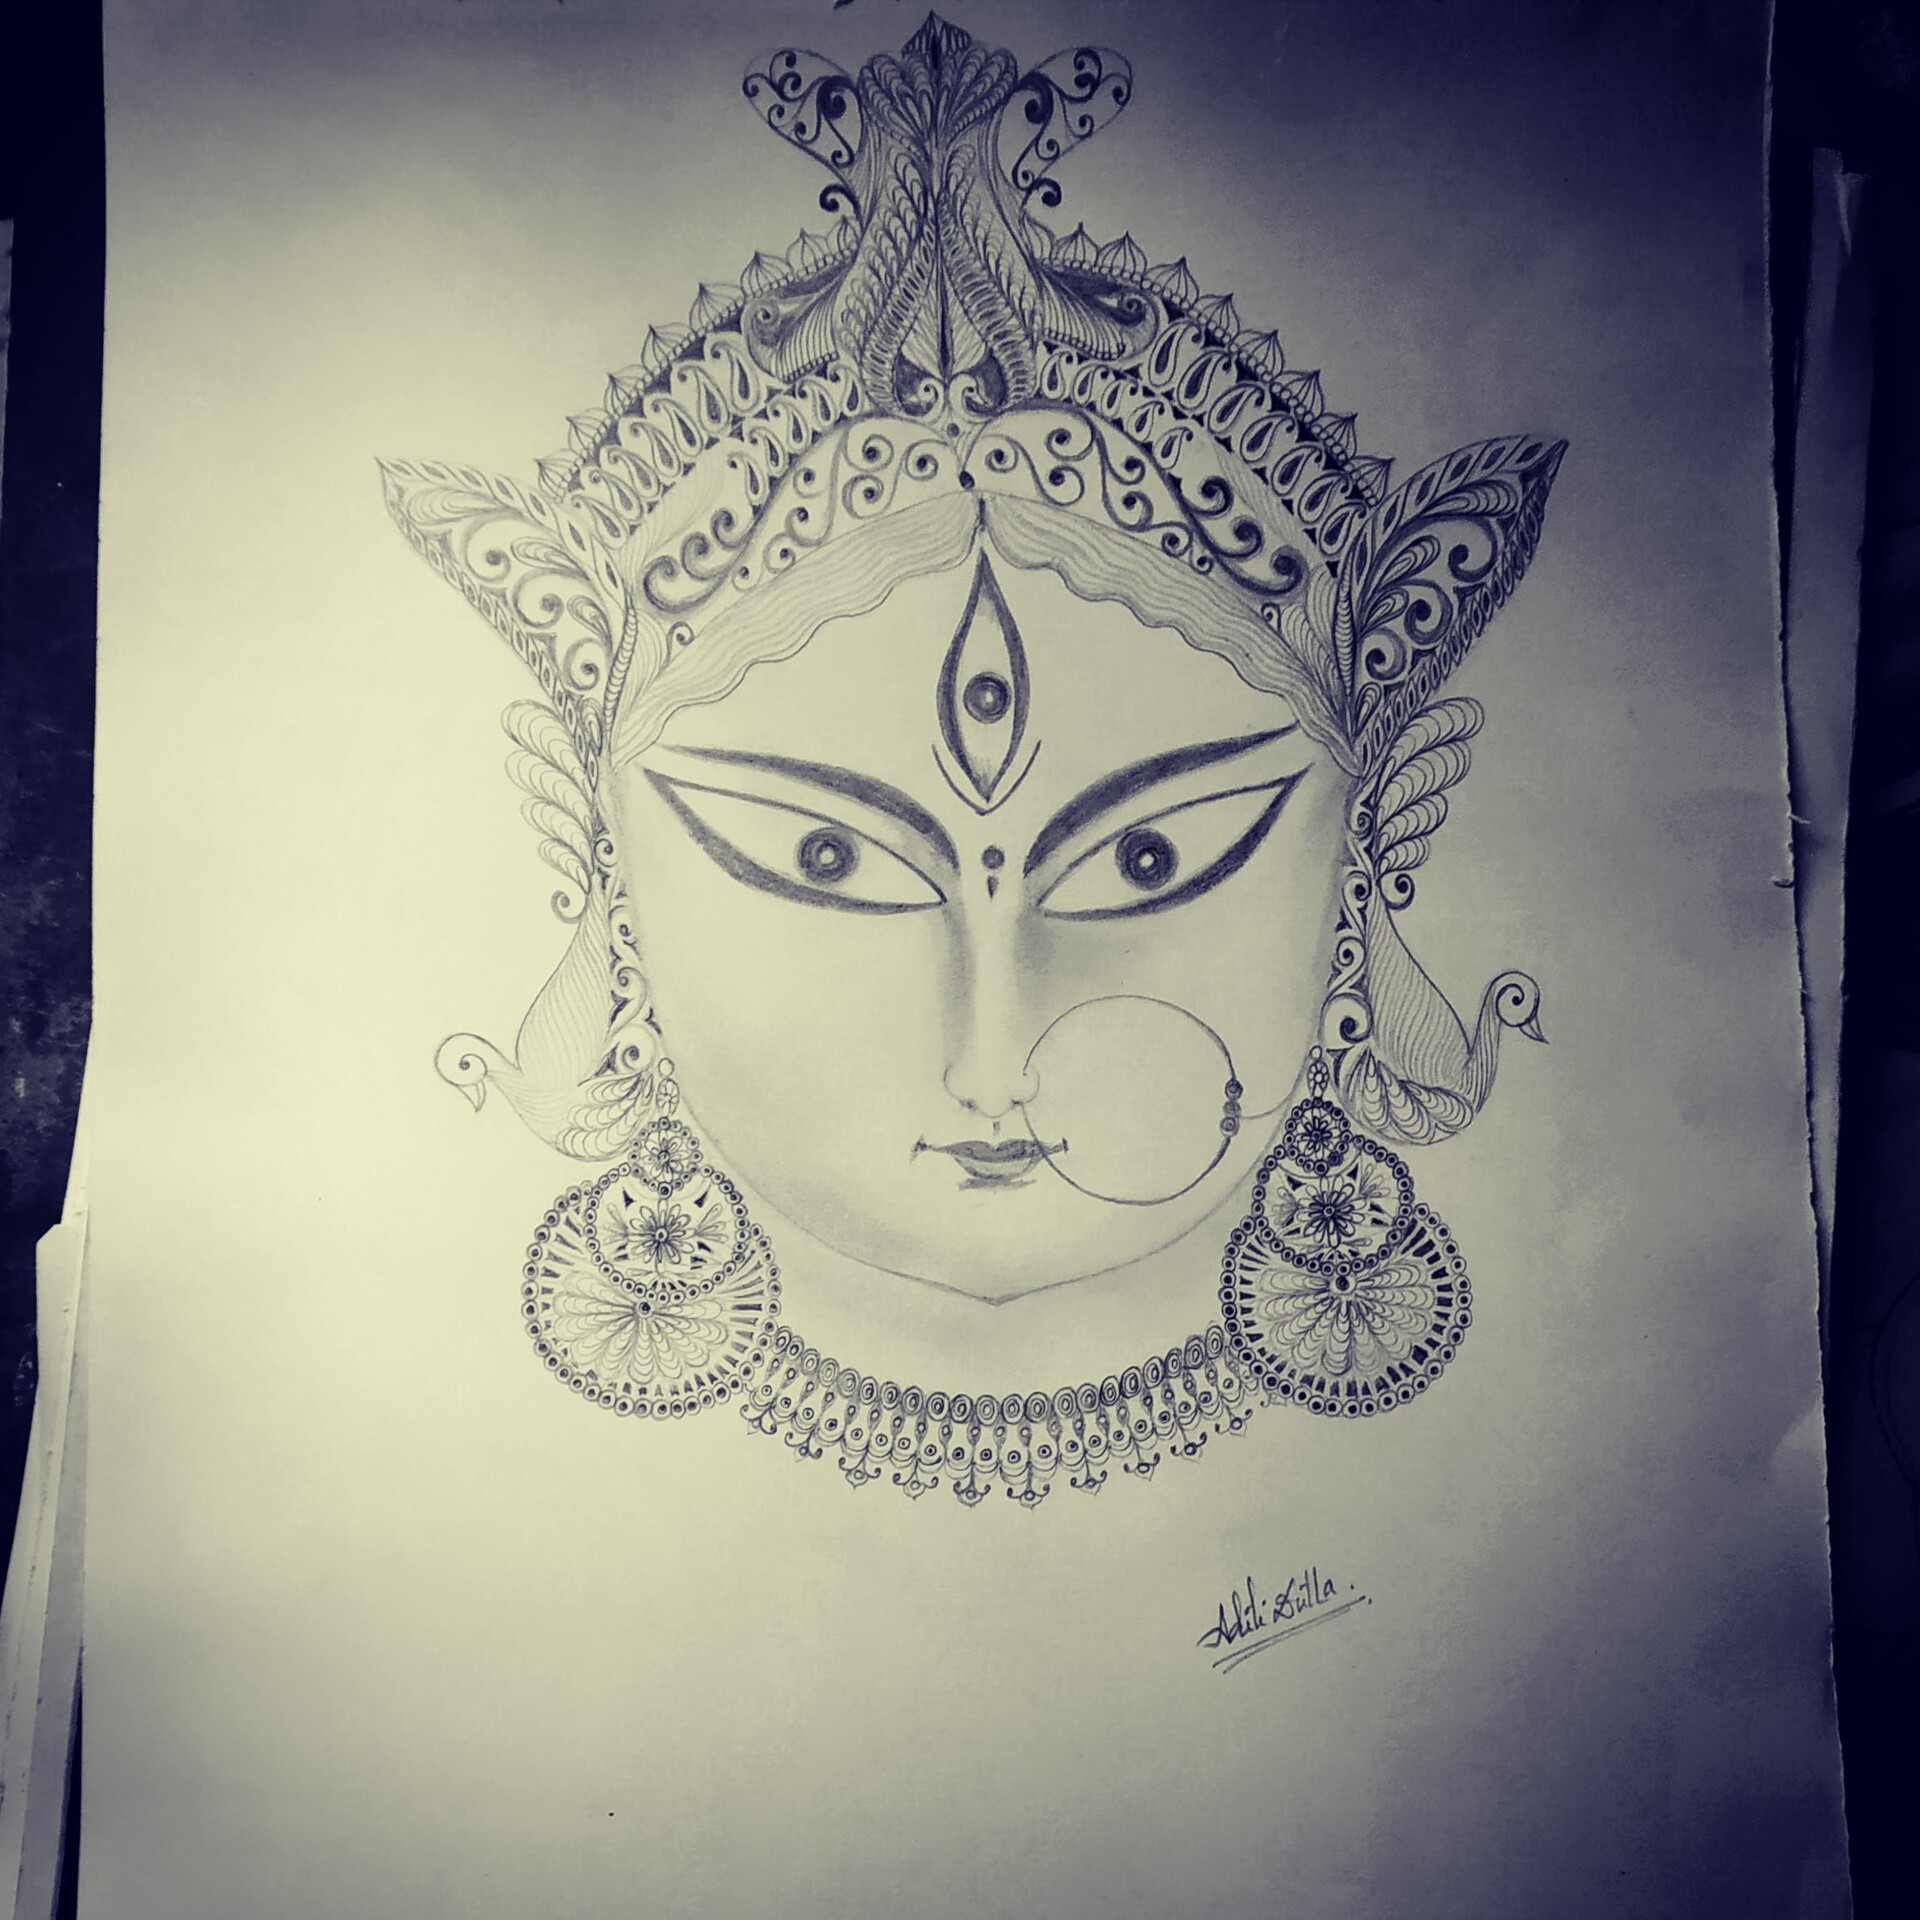 Maa Durga hidden within every woman Painting by Young Artist Swastika Maiti